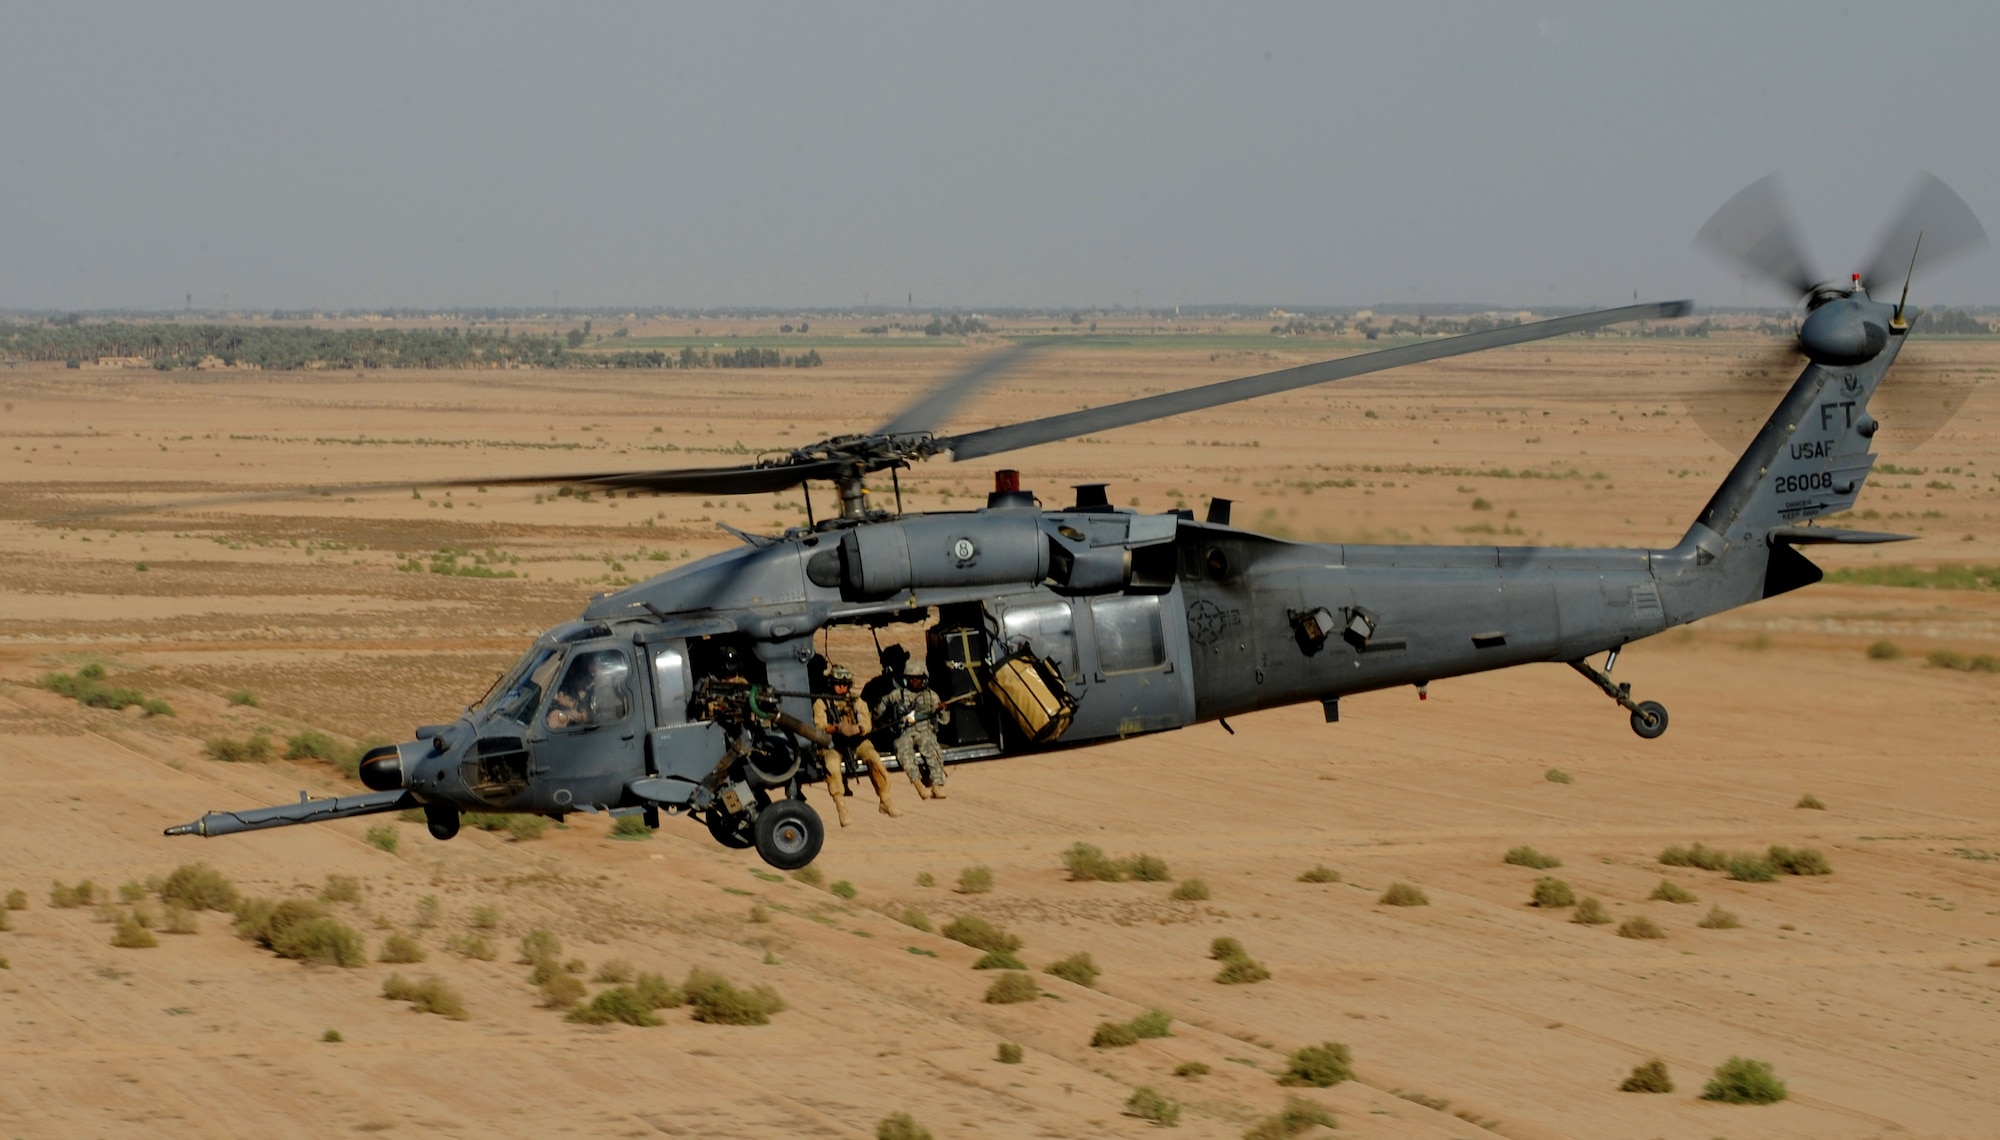 A U.S. Air Force HH-60 Pavehawk from the 64th Expeditionary Rescue Squadron, Joint Base Balad, Iraq, flies over the Iraqi landscape April 10, 2009, in support of Operation Iraqi Freedom.  (U.S. Air Force photo by Staff Sgt. James L. Harper Jr.)